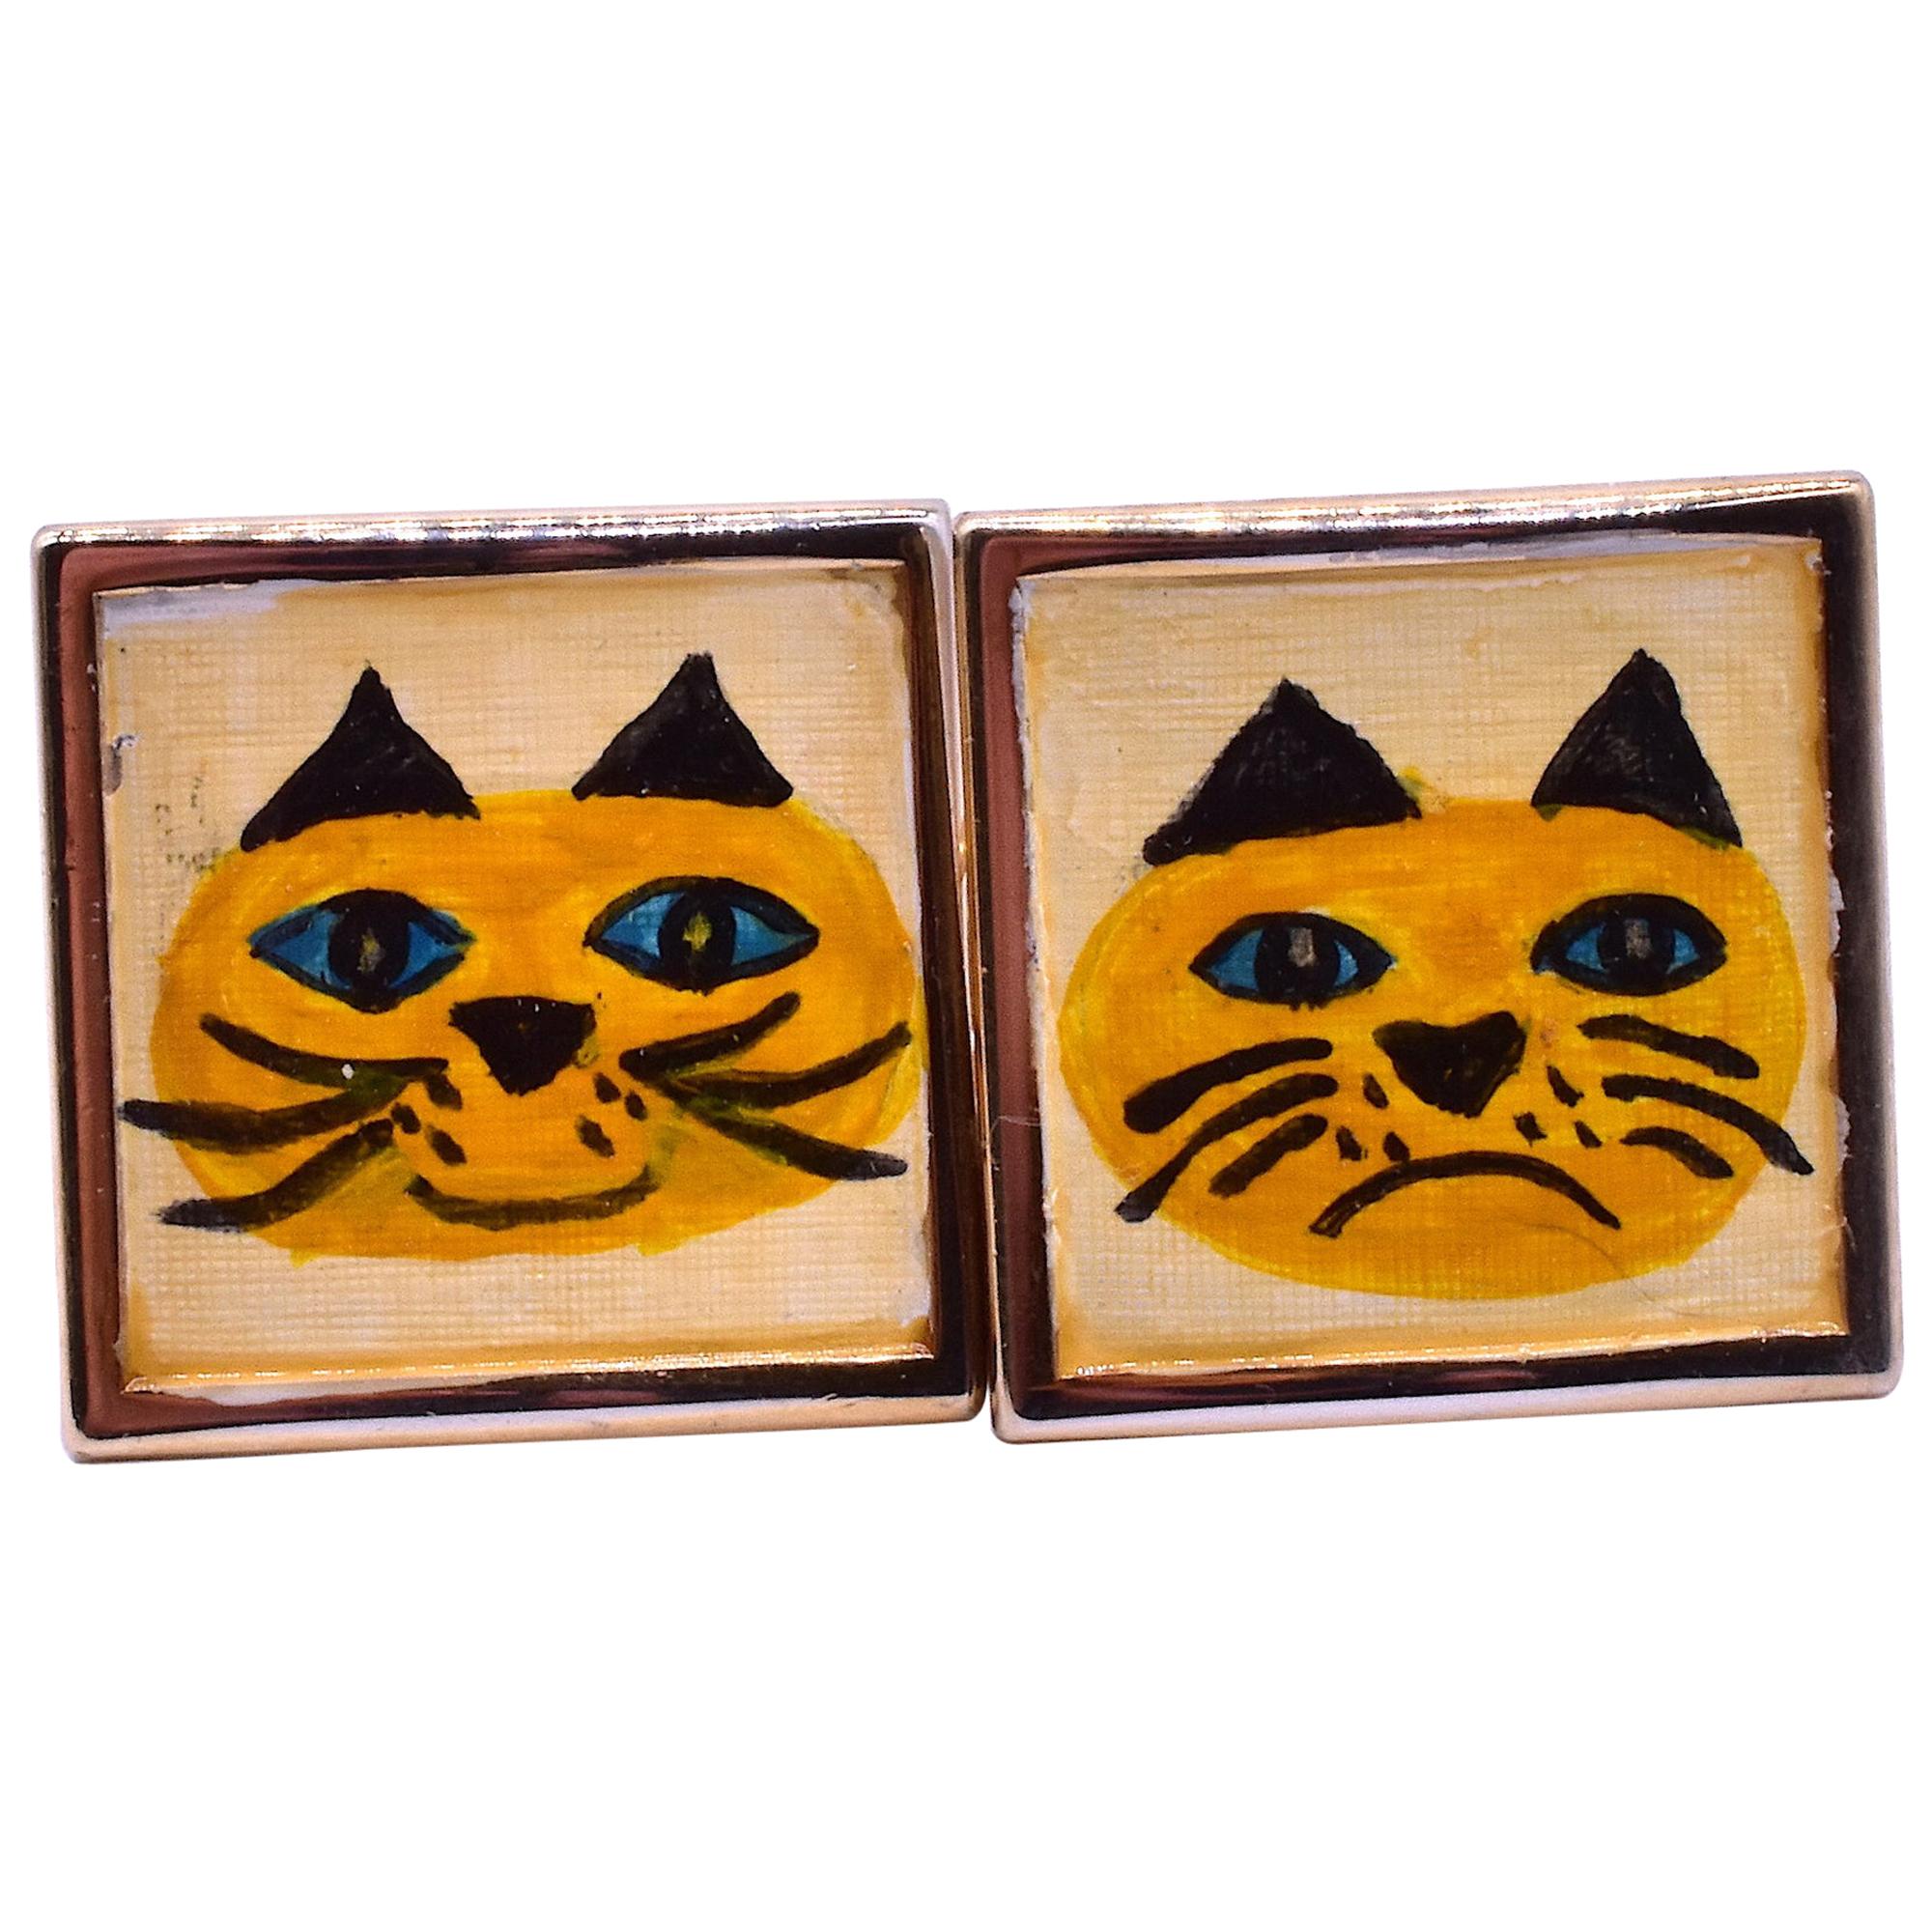 Modern Cufflinks with Painted Cats, circa 1950